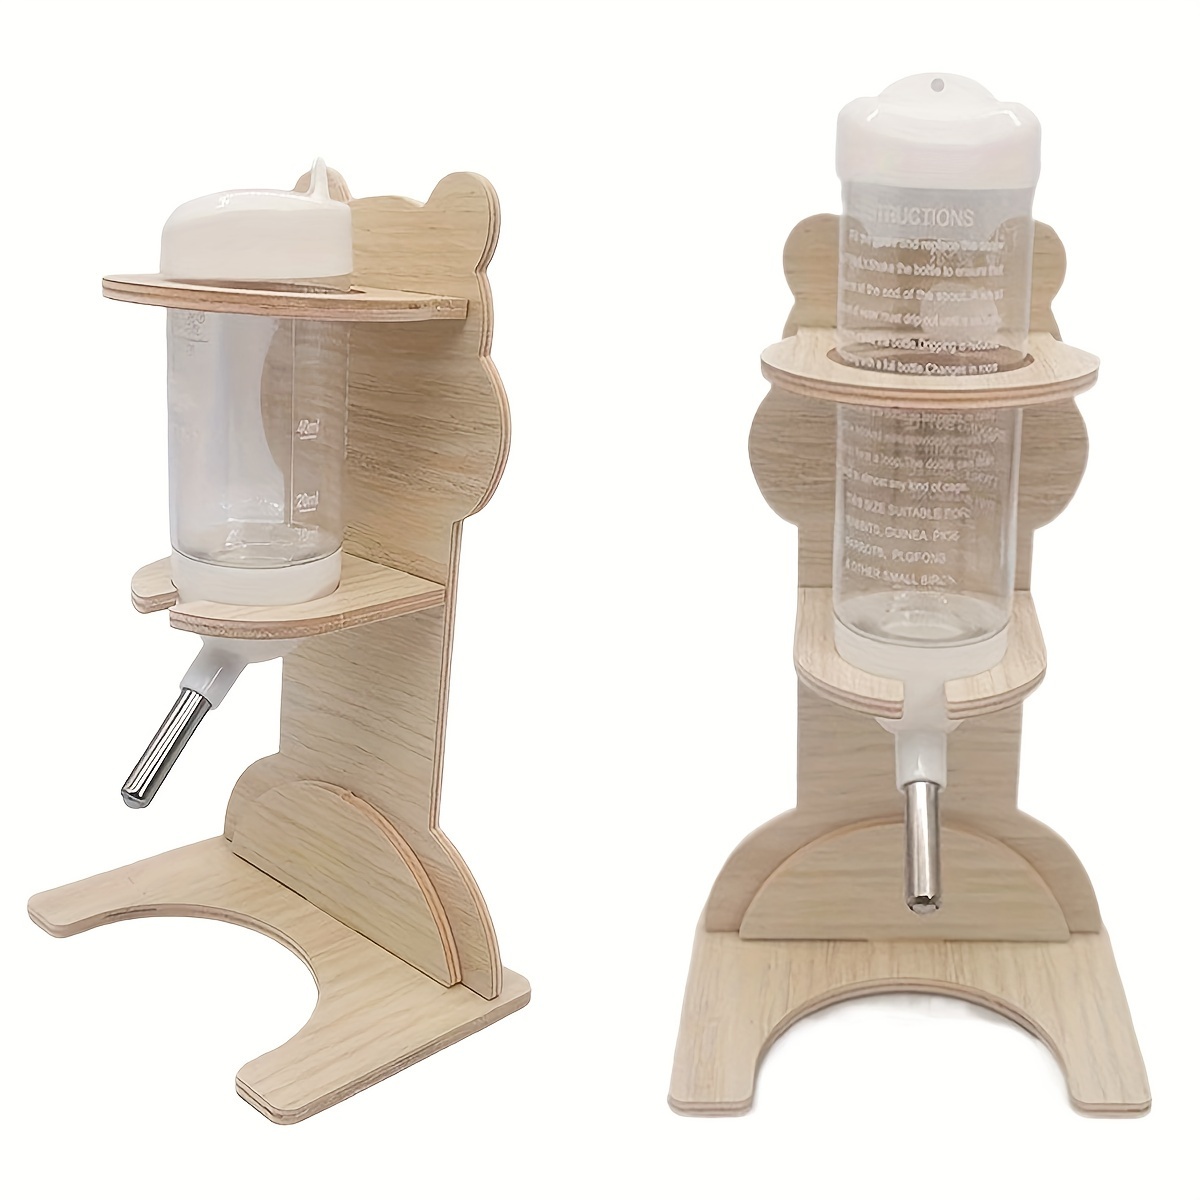 

1pc Hamster Ball Water Bottle With Wooden Holder, Small Pet Water Feeder